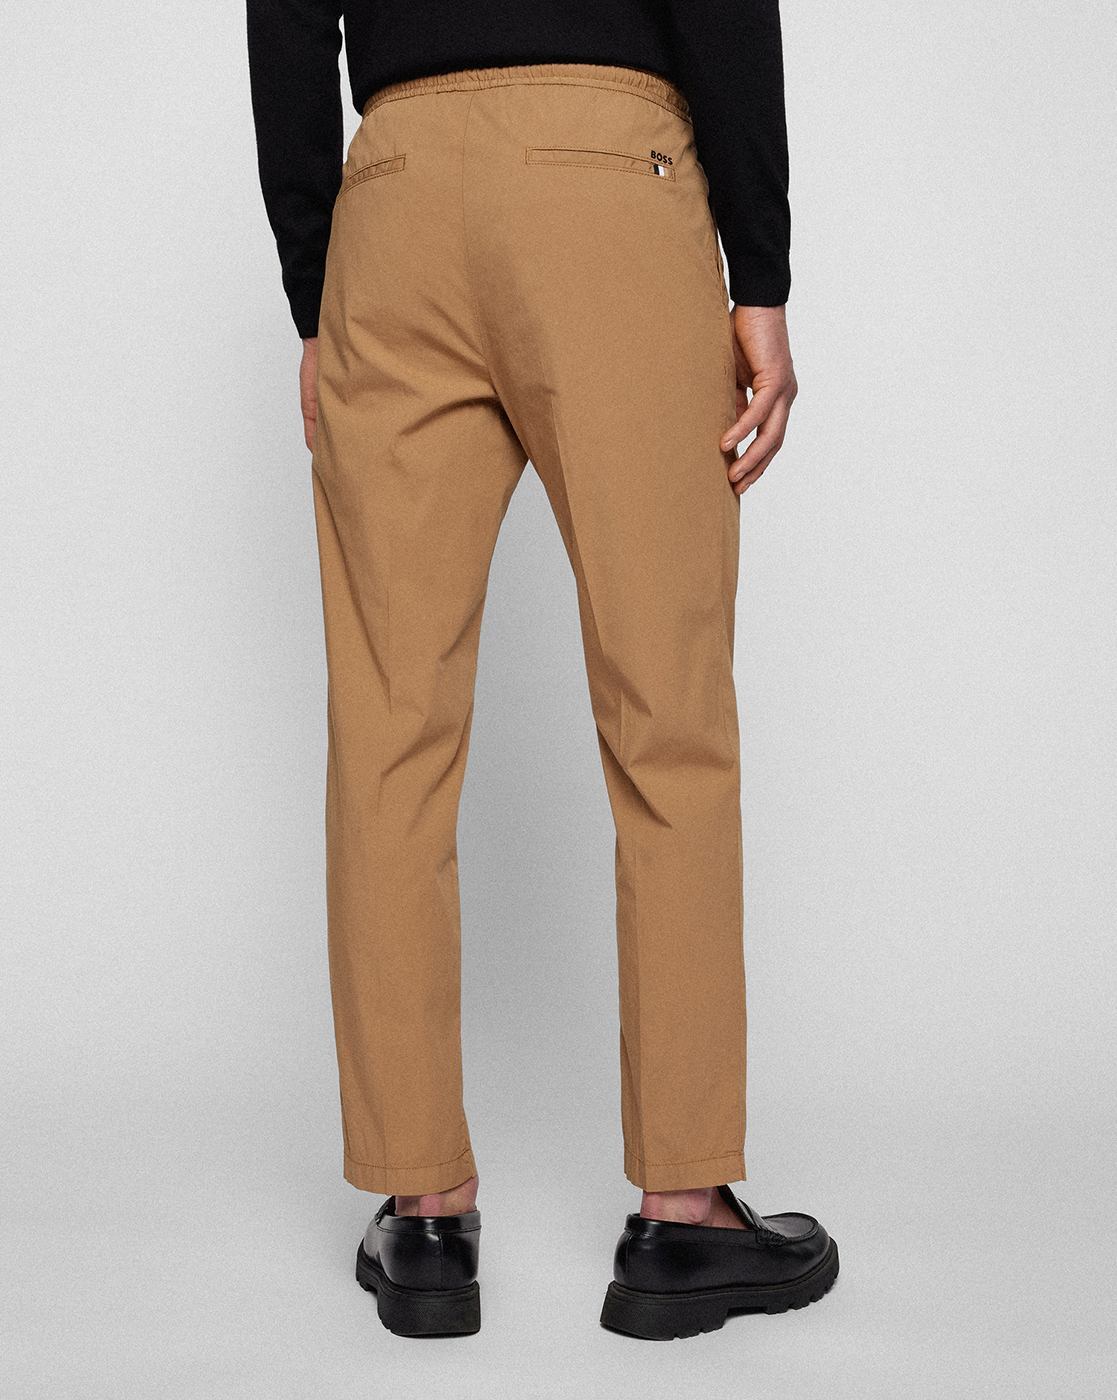 Buy Boss Slim Fit Trousers with Drawstring Waist  Grey Color Men  AJIO  LUXE